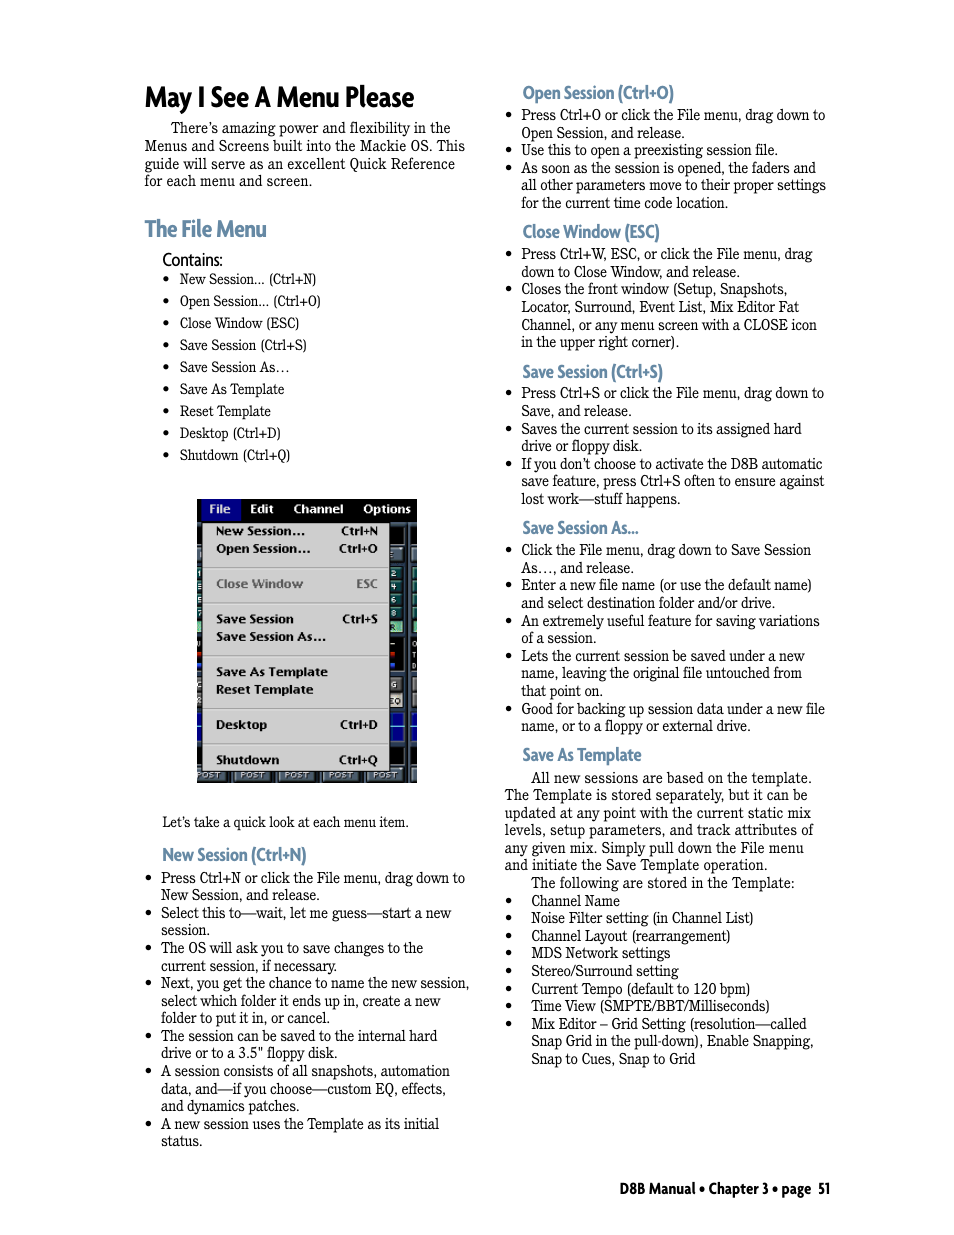 May i see a menu please, The file menu, Contains | New session (ctrl+n), Open session (ctrl+o), Close window (esc), Save session (ctrl+s), Save session as, Save as template | MACKIE Digital 8Bus D8B v5.1 User Manual | Page 57 / 198